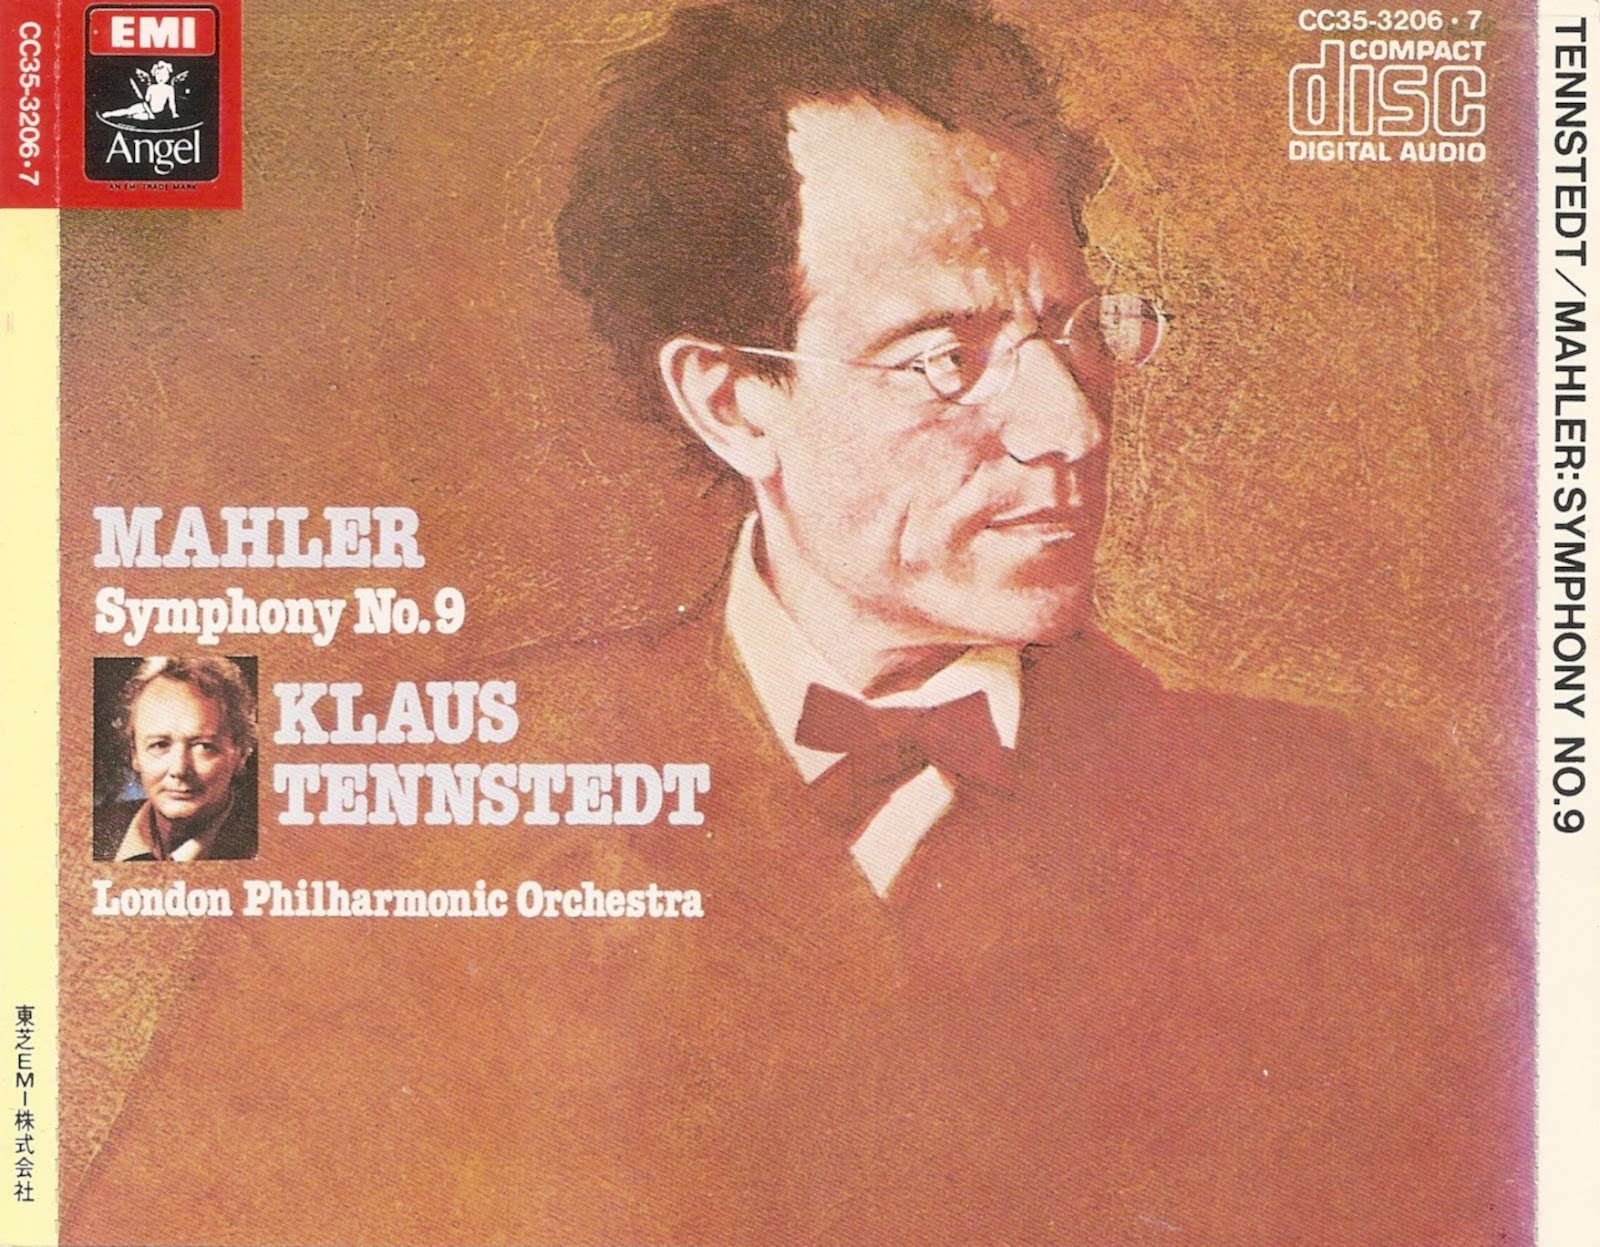 The First Pressing CD Collection: Gustav Mahler Symphony No.